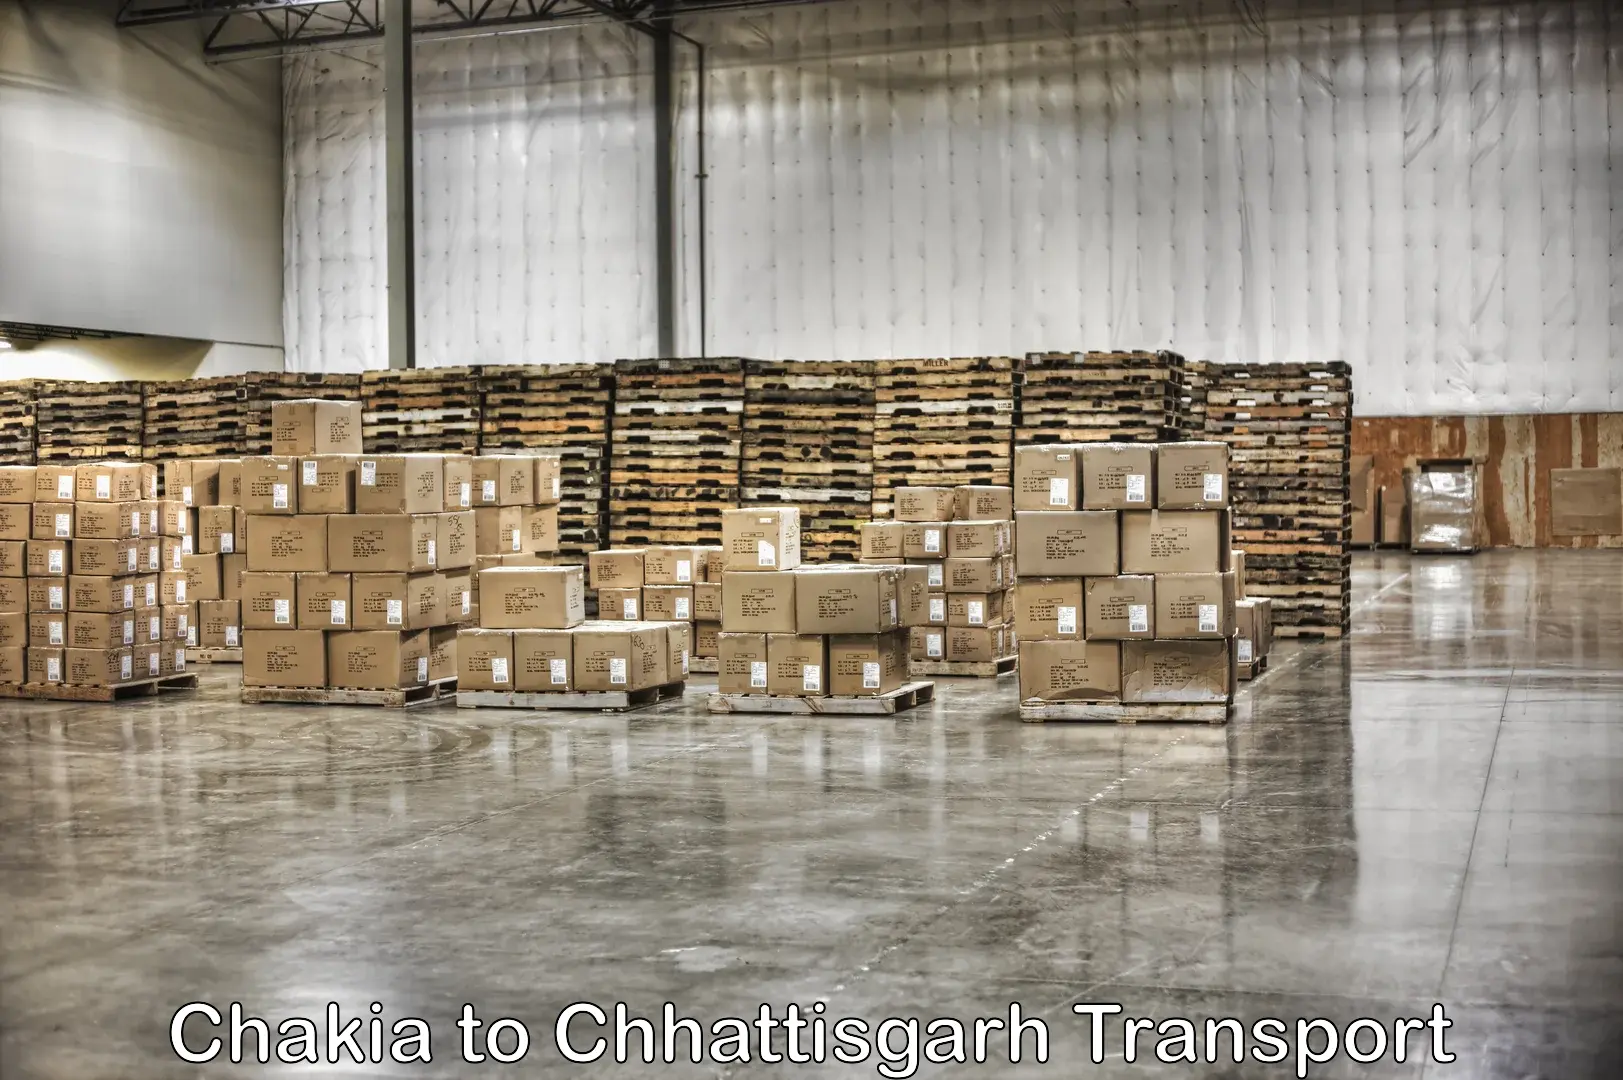 Truck transport companies in India Chakia to Dongargarh